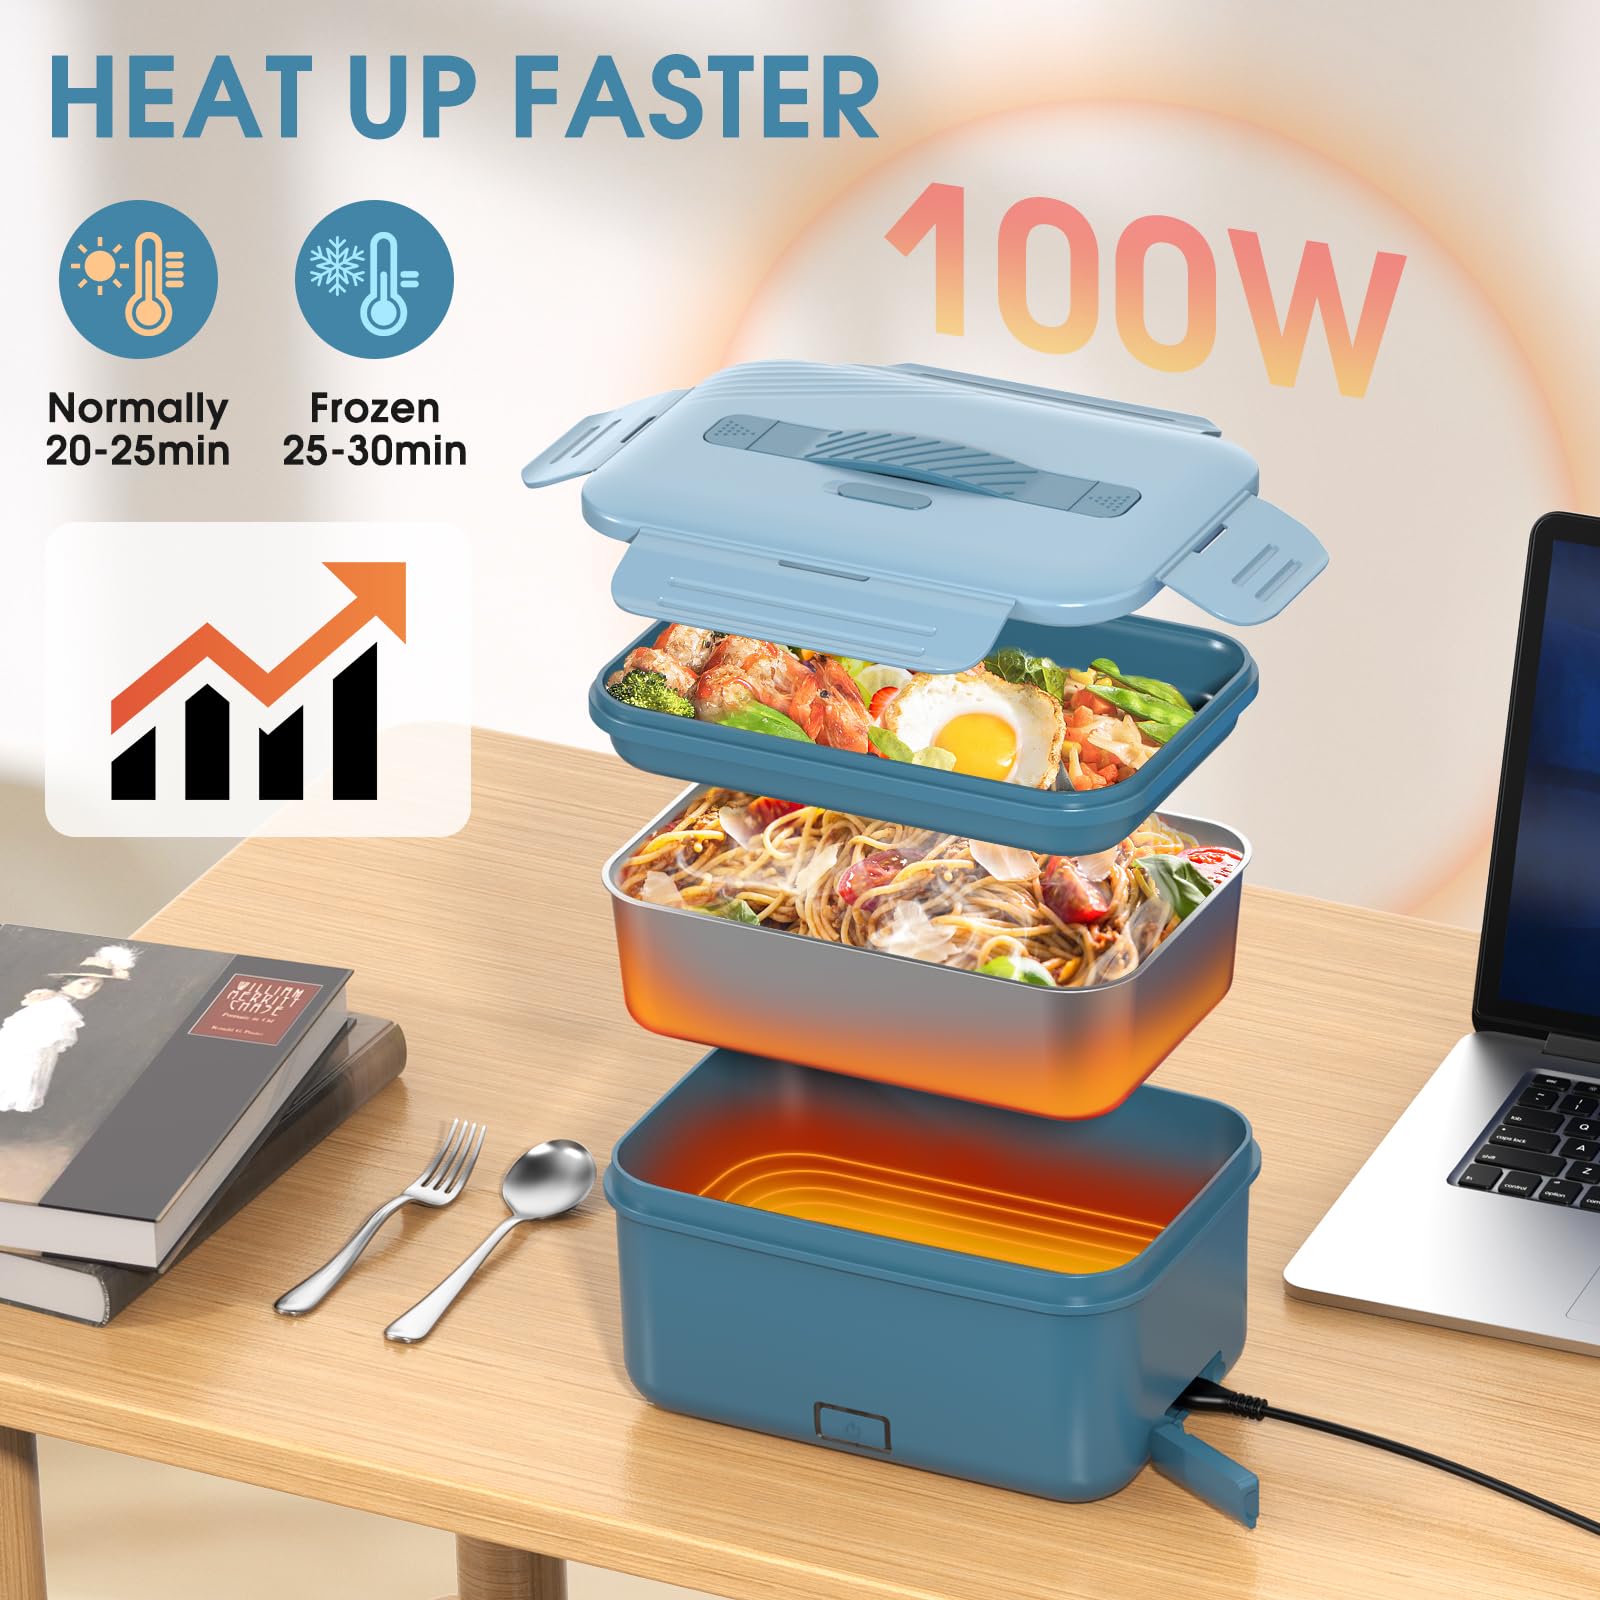 Carsolt Electric Lunch Box Food Heater Upgrade 3 in 1 Portable Food Warmer 60-100W Leakproof Heated Lunch Box for Adults Car/Truck/Office with 1.8L SS Container Fork Spoon Carry Bag, 12V/24V/110V